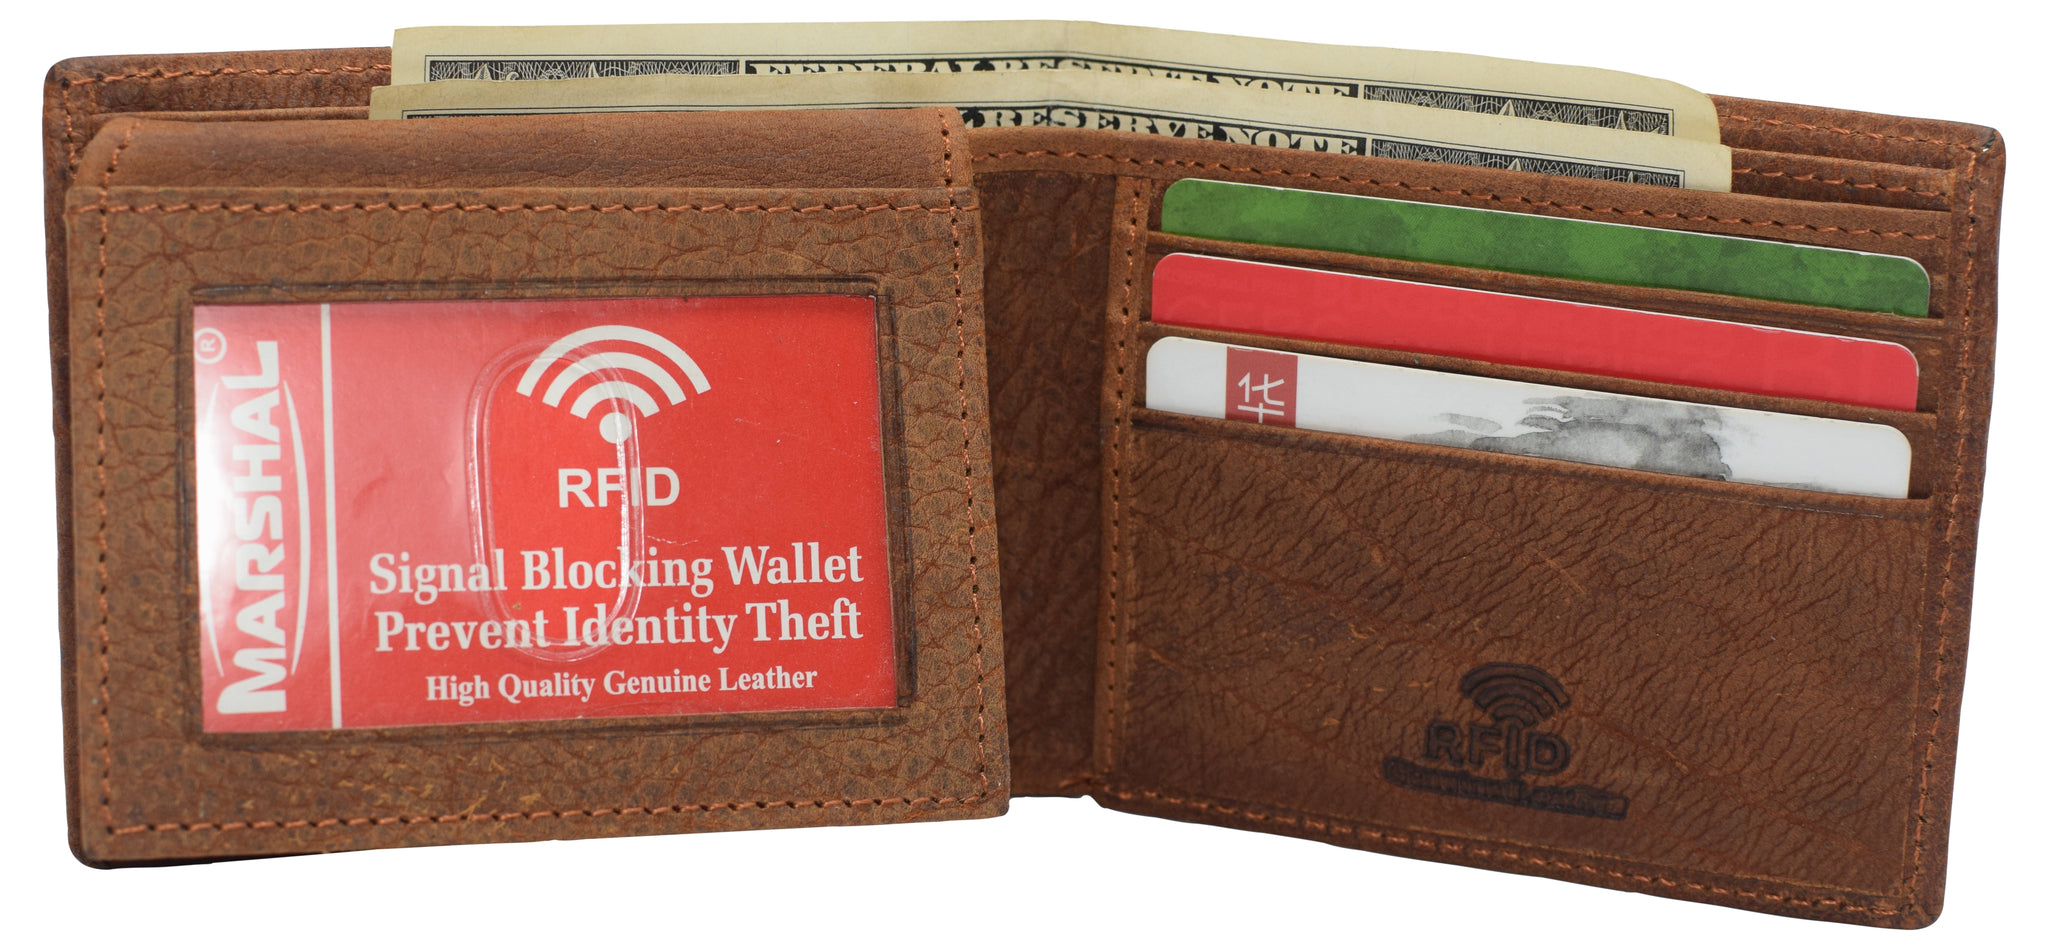 Re)Classic Wallet